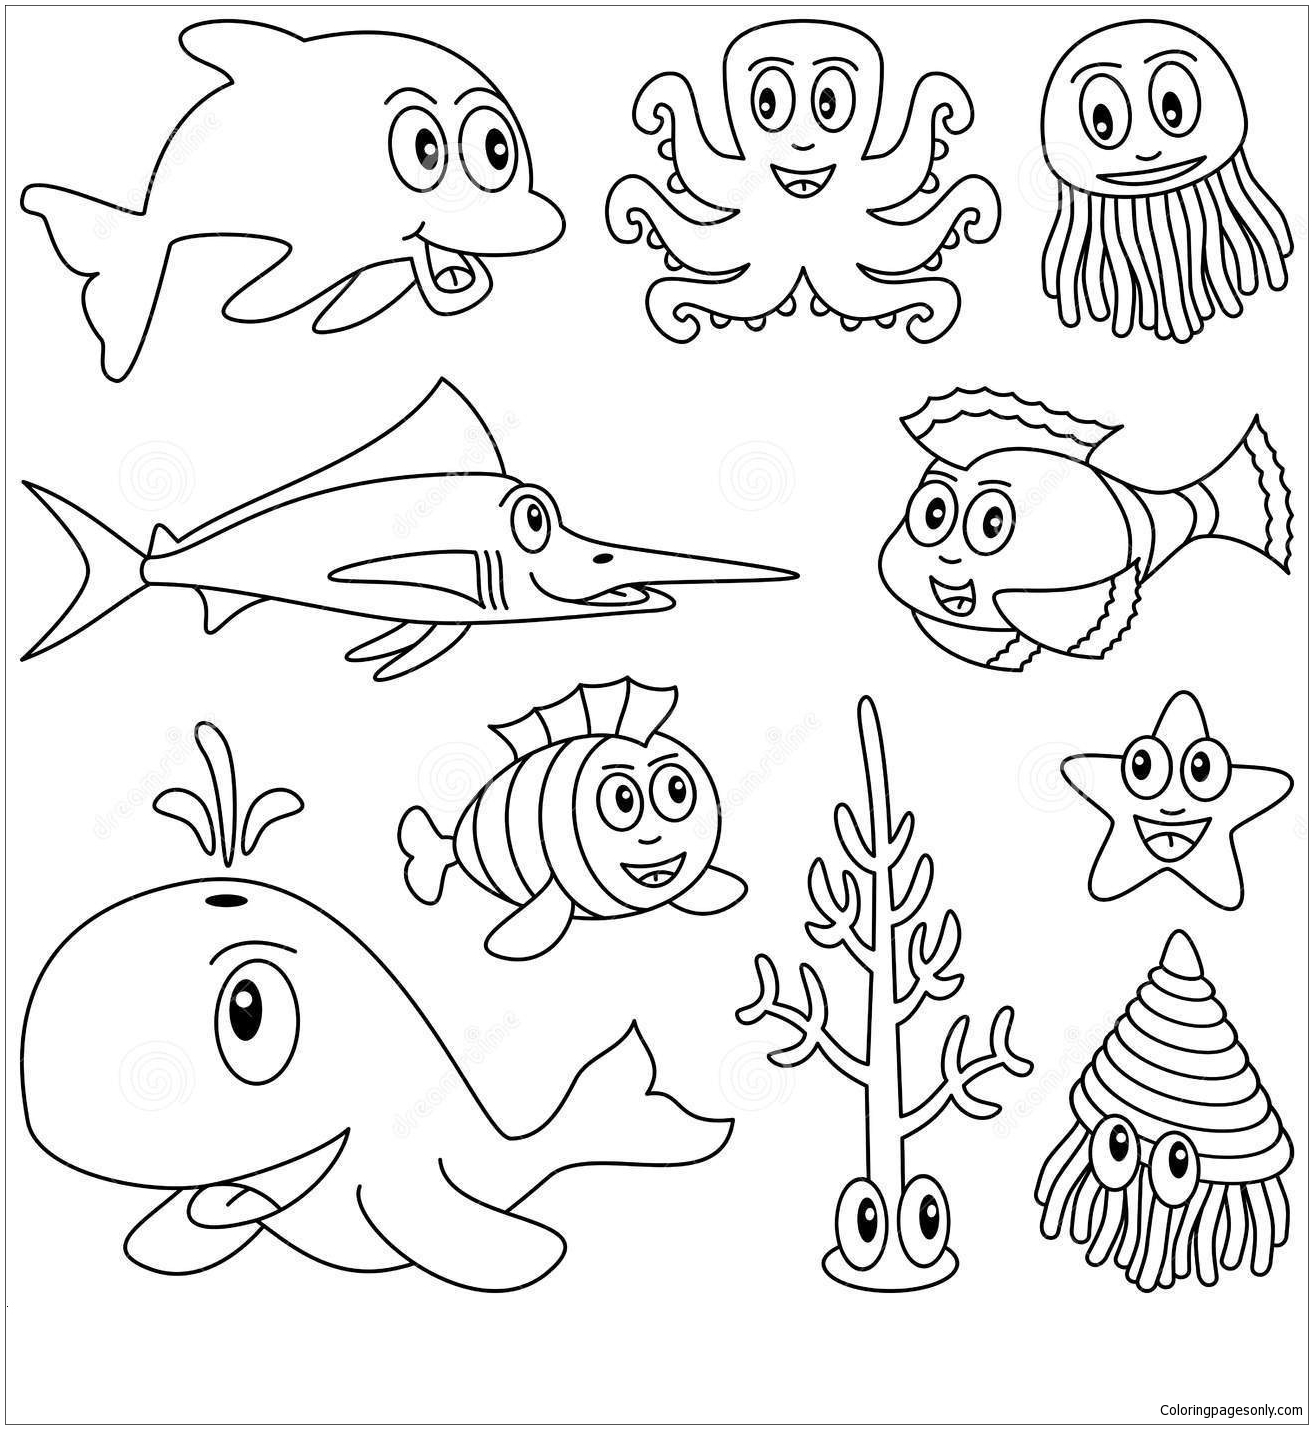 Sea Animals 1 Coloring Pages - Nature & Seasons Coloring Pages